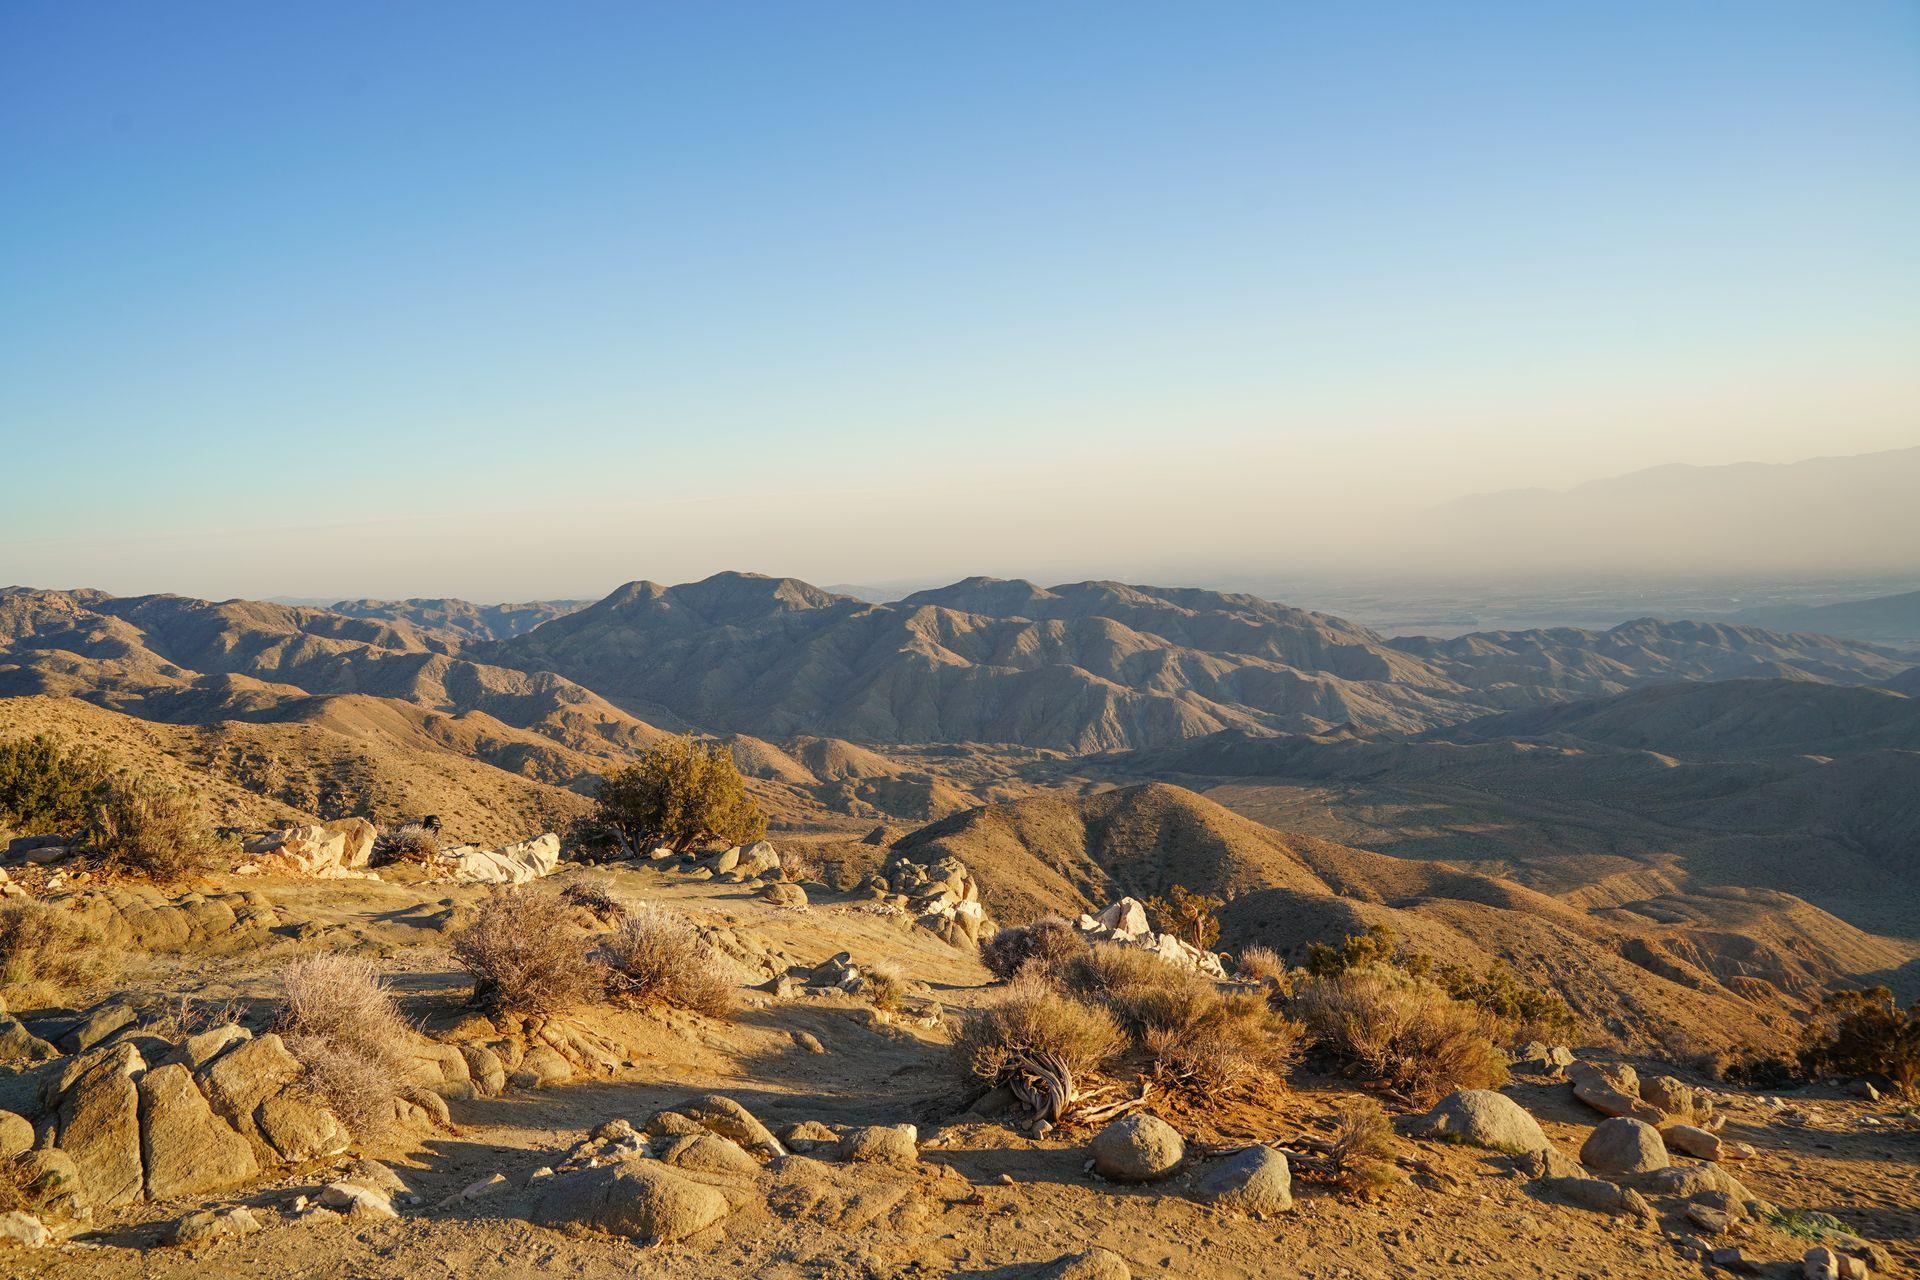 A view of mountains glowing orange at sunset from Keys View. The mountains in the far distance are obscured by haze.